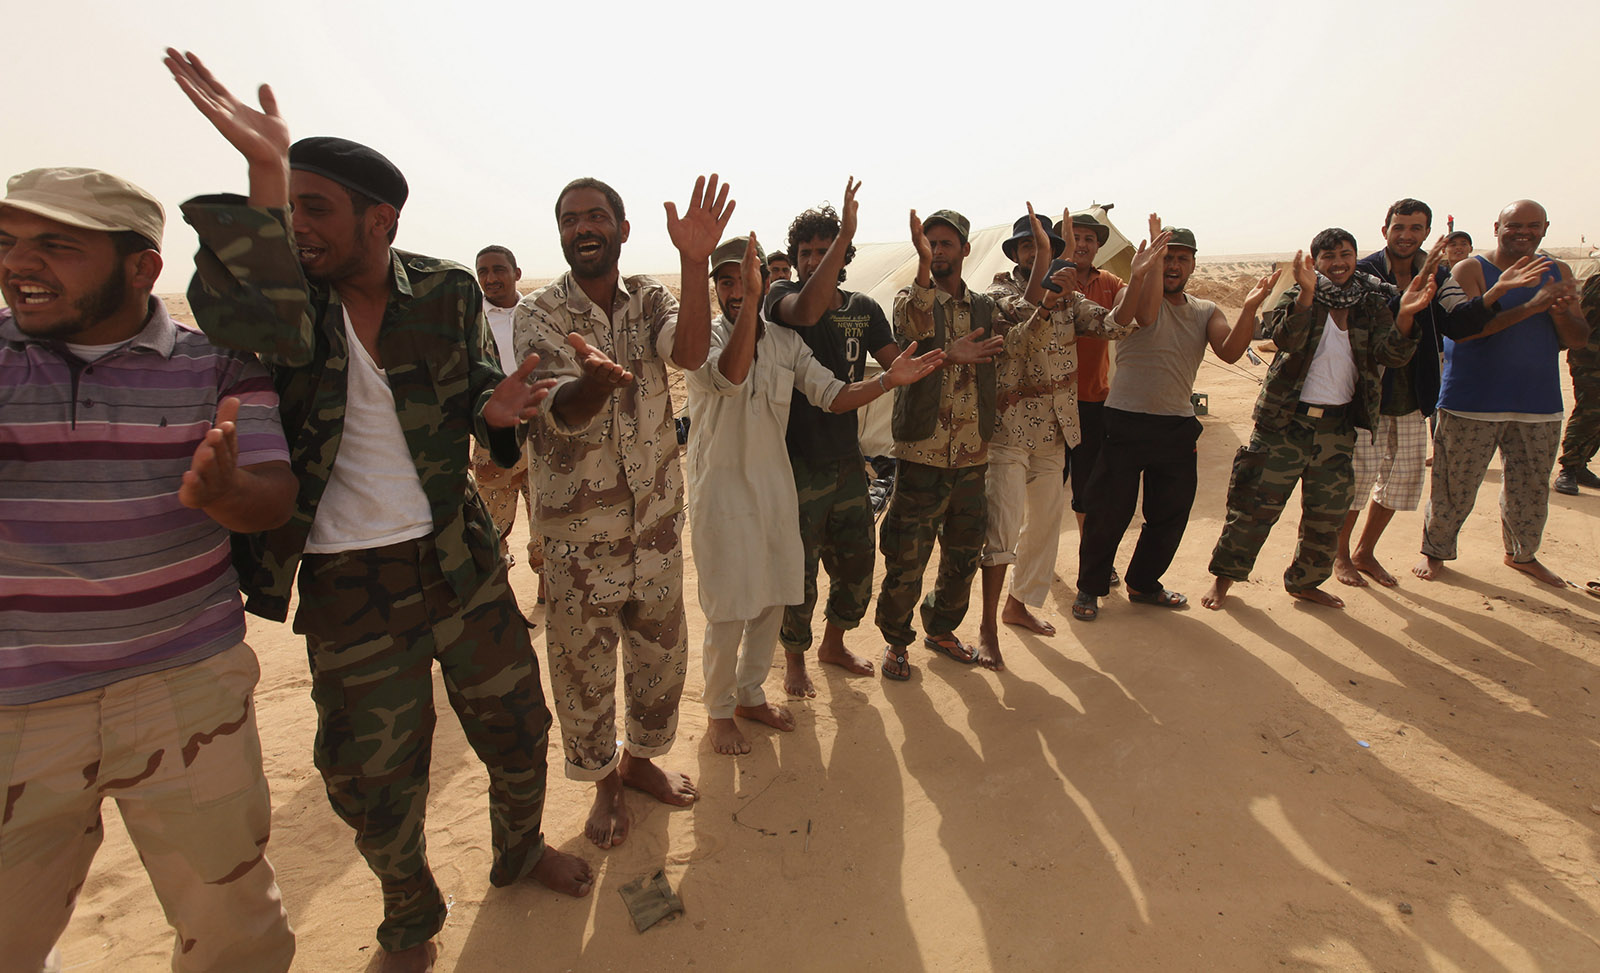 Rebel fighters celebrate on the front line, after hearing news that the ICC had issued an arrest warrant for Libyan leader Gaddafi